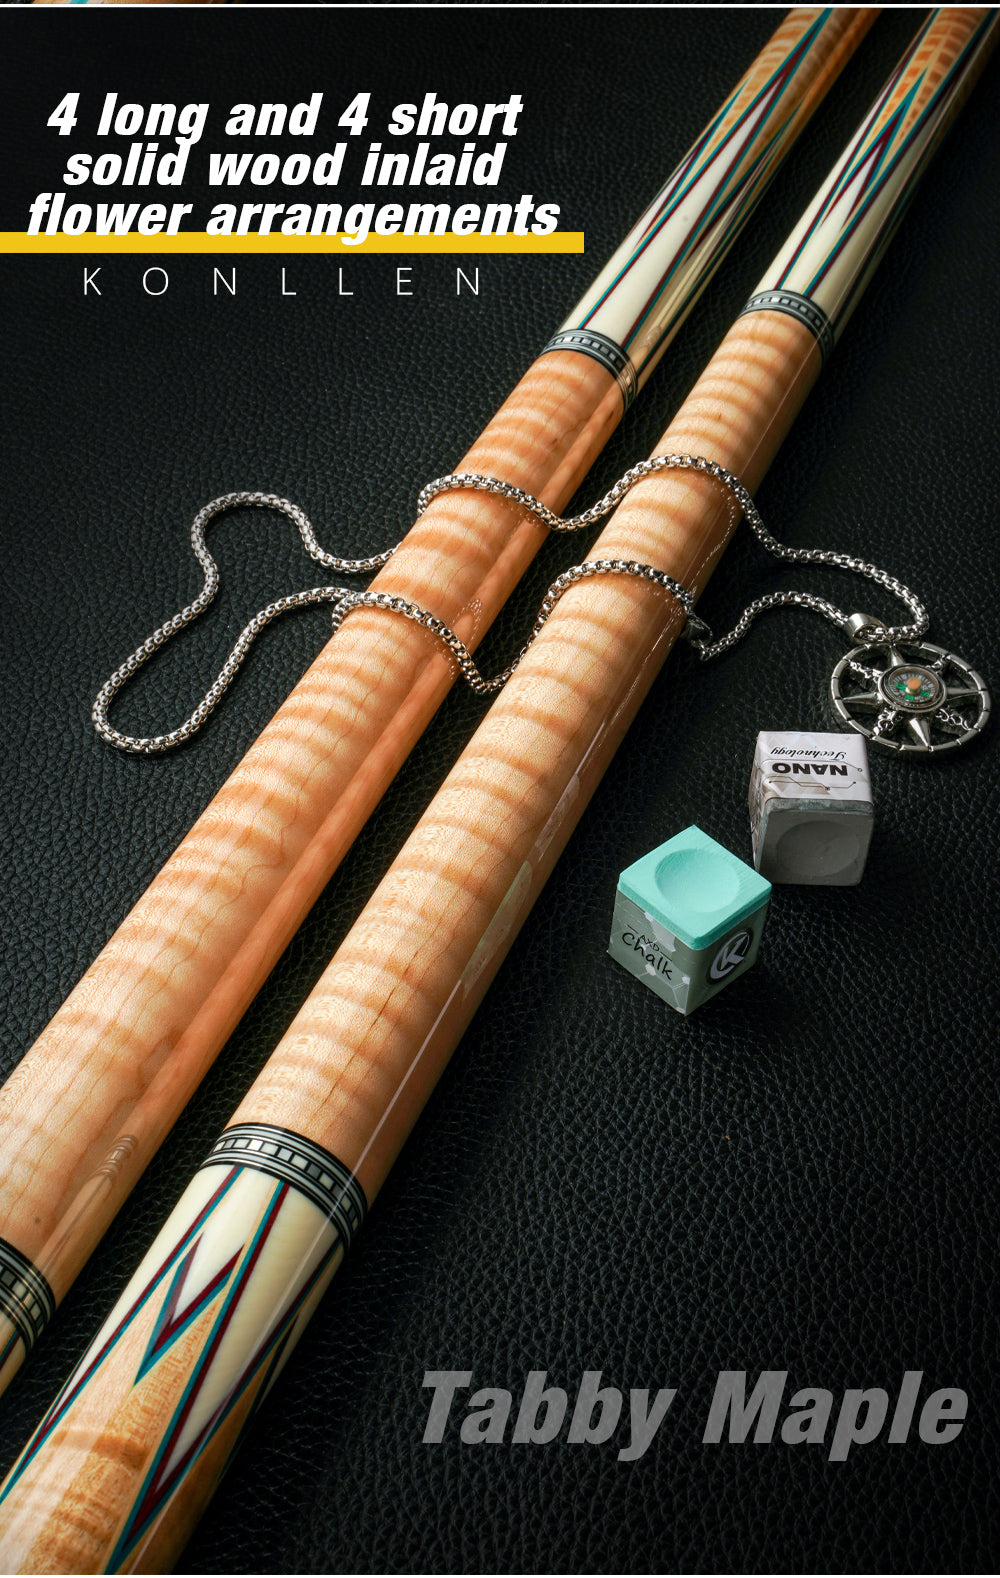 KONLLEN Carom Billiards Cue Real Inlay Low Deflection 3 Cushion Carom Cue 12 Pieces in 1 Shaft Technology 142cm 12mm Libre Cue